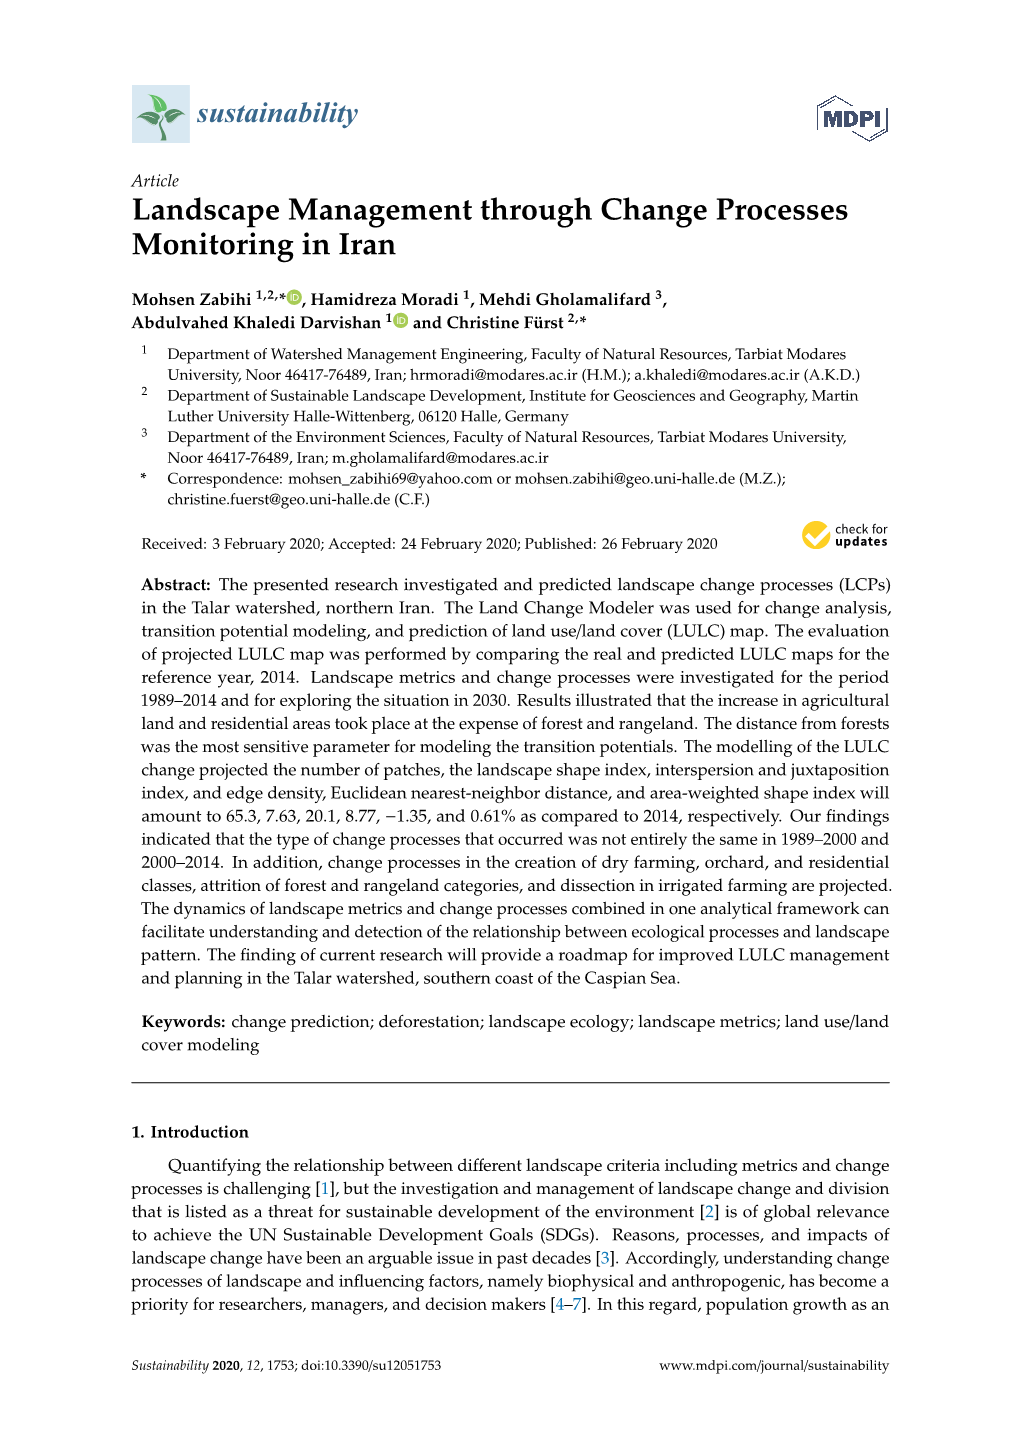 Landscape Management Through Change Processes Monitoring in Iran